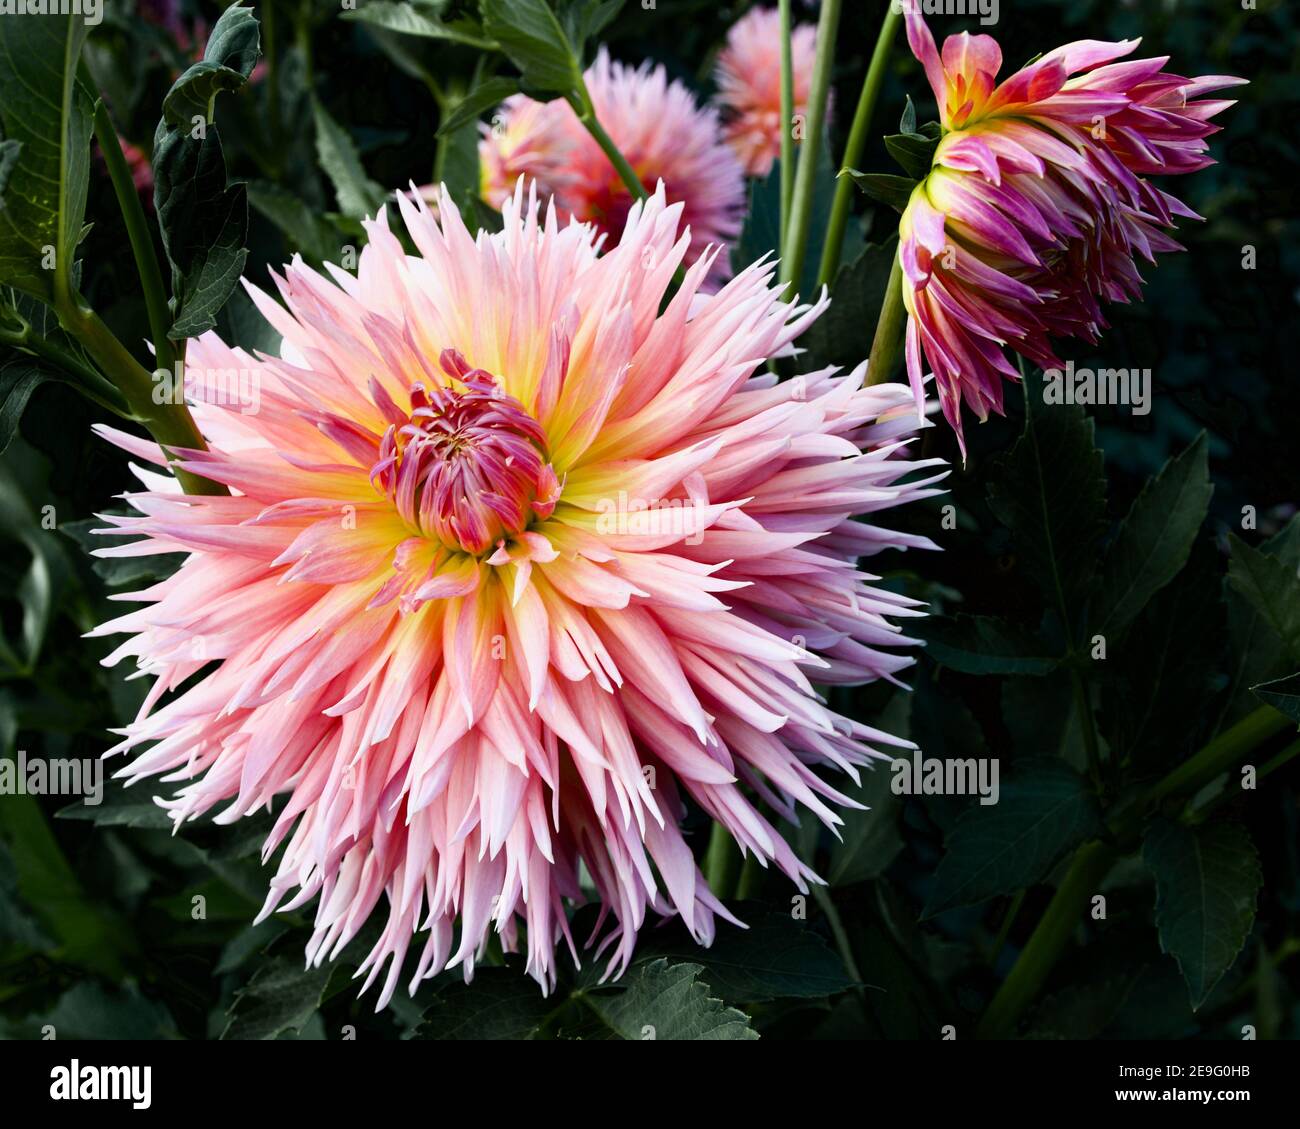 Shaggy Chic dahlia captured at Swan Island Dahlias in Canby, Oregon, USA Stock Photo